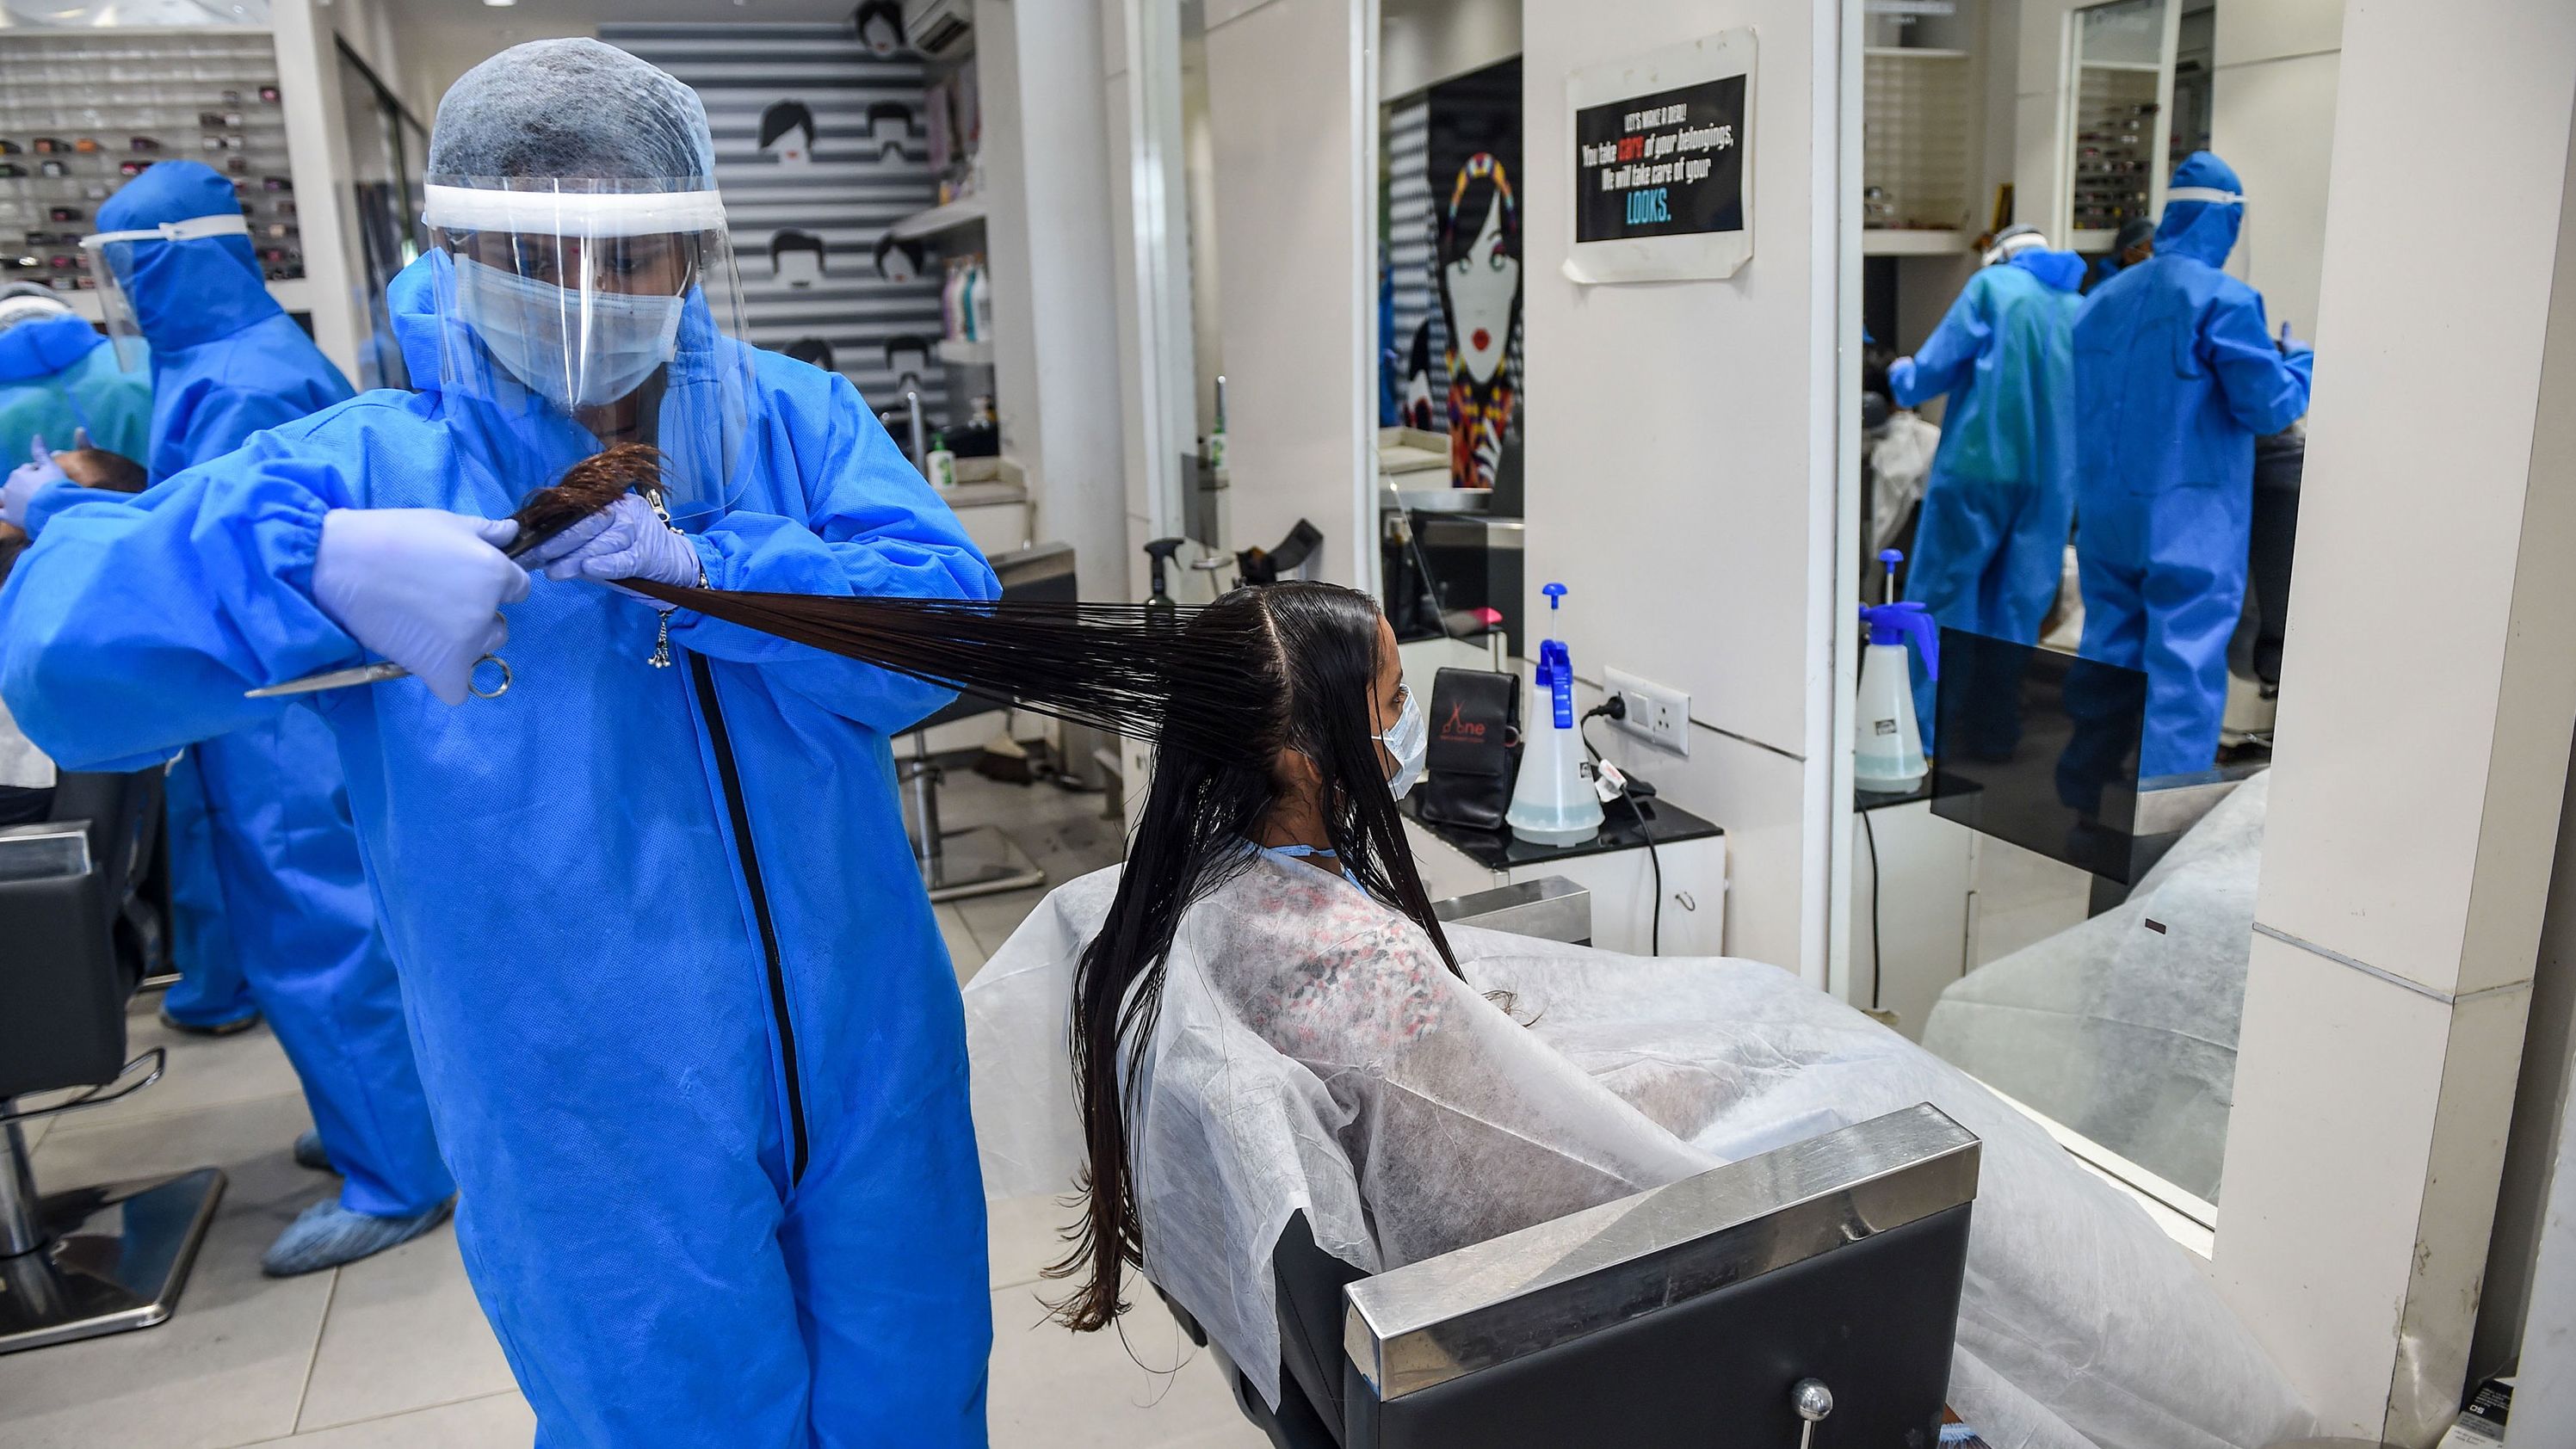 A worker wears protective gear while cutting a customer's hair at a salon in Nadiad, India, on May 17. India's lockdown was set to remain in place until May 31, but ma